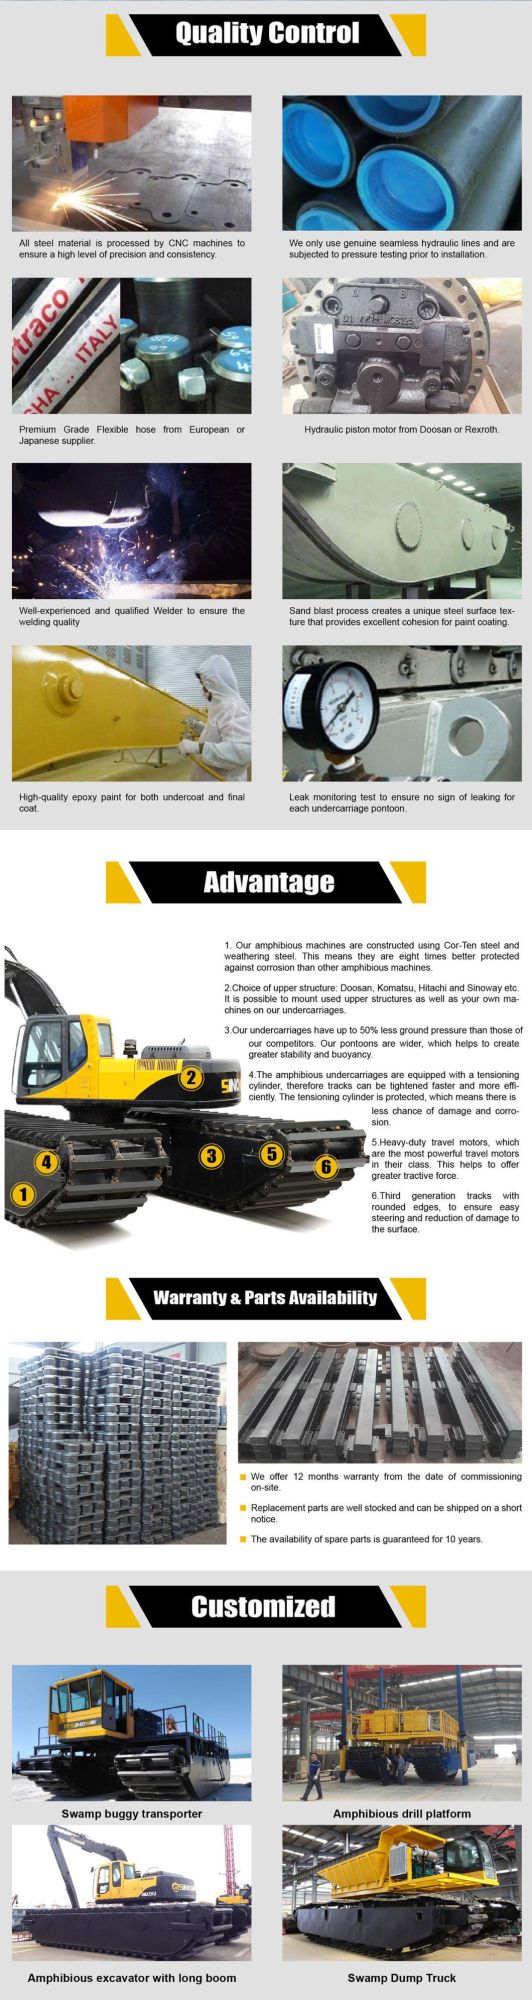 Amphibious Long Reach Excavator with Factory Price